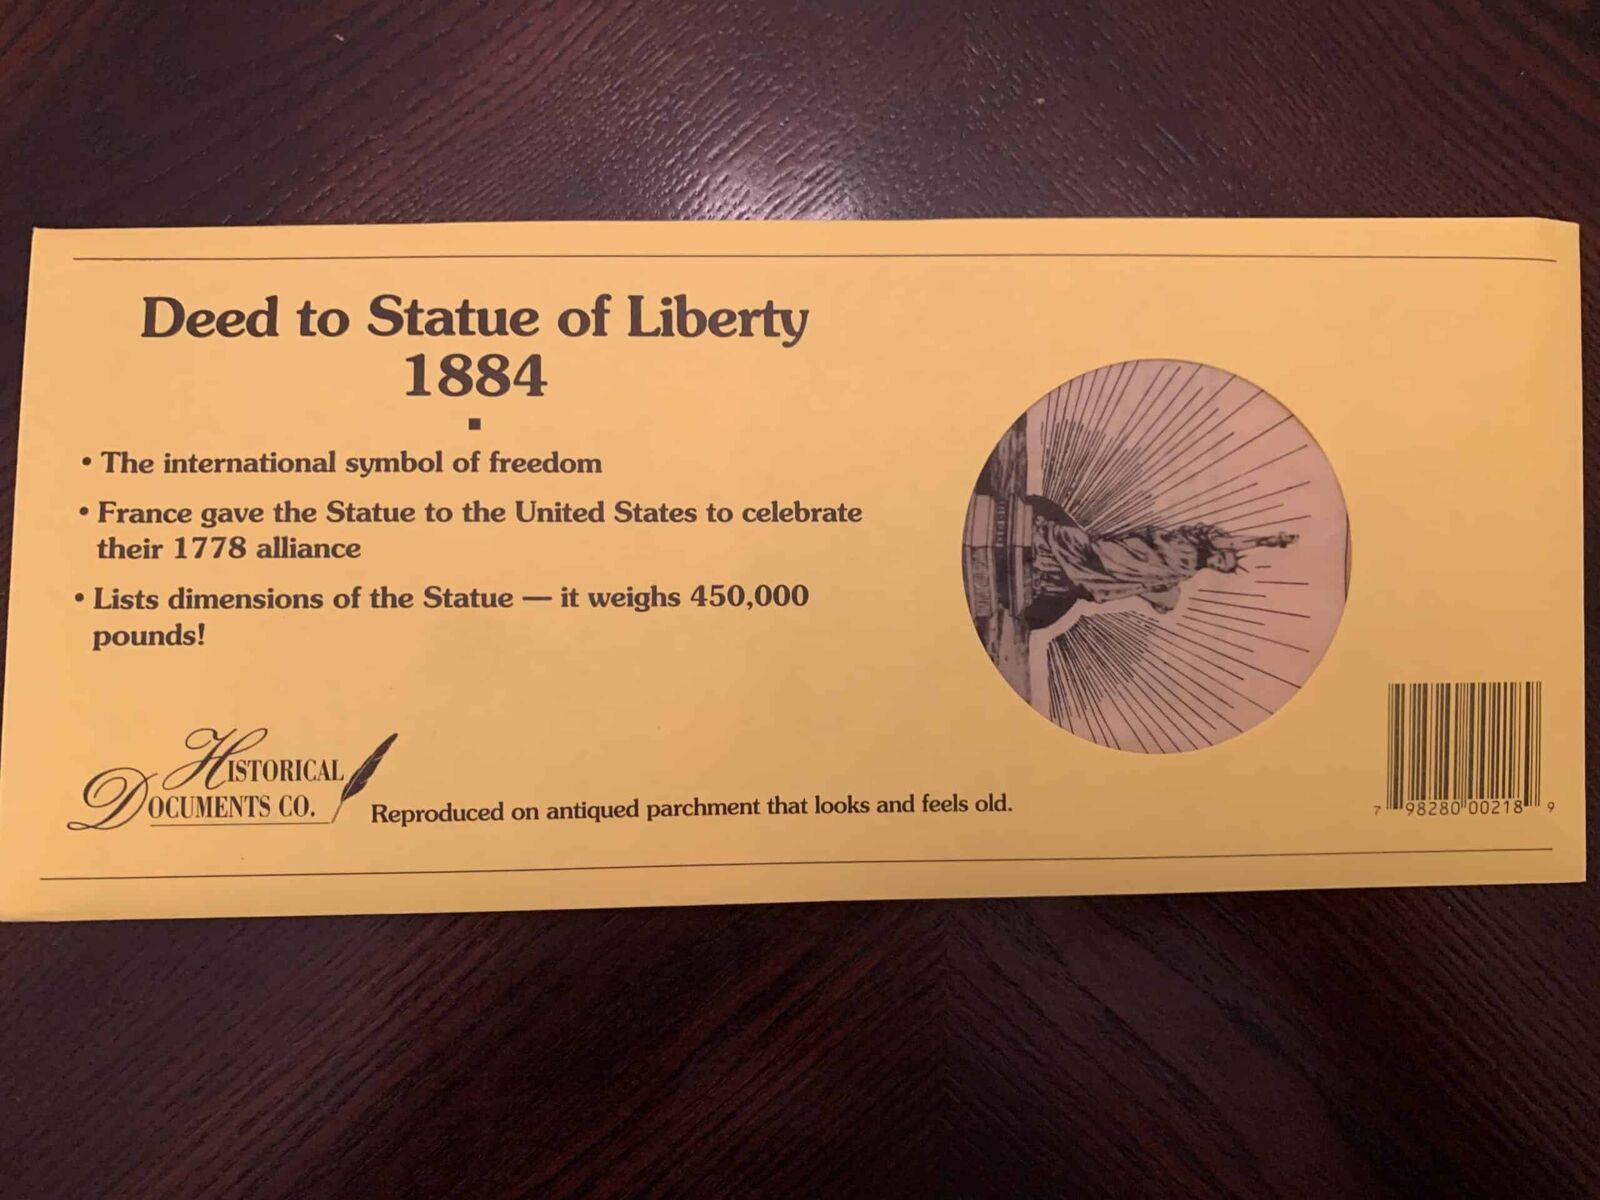 Deed to Statue of Liberty